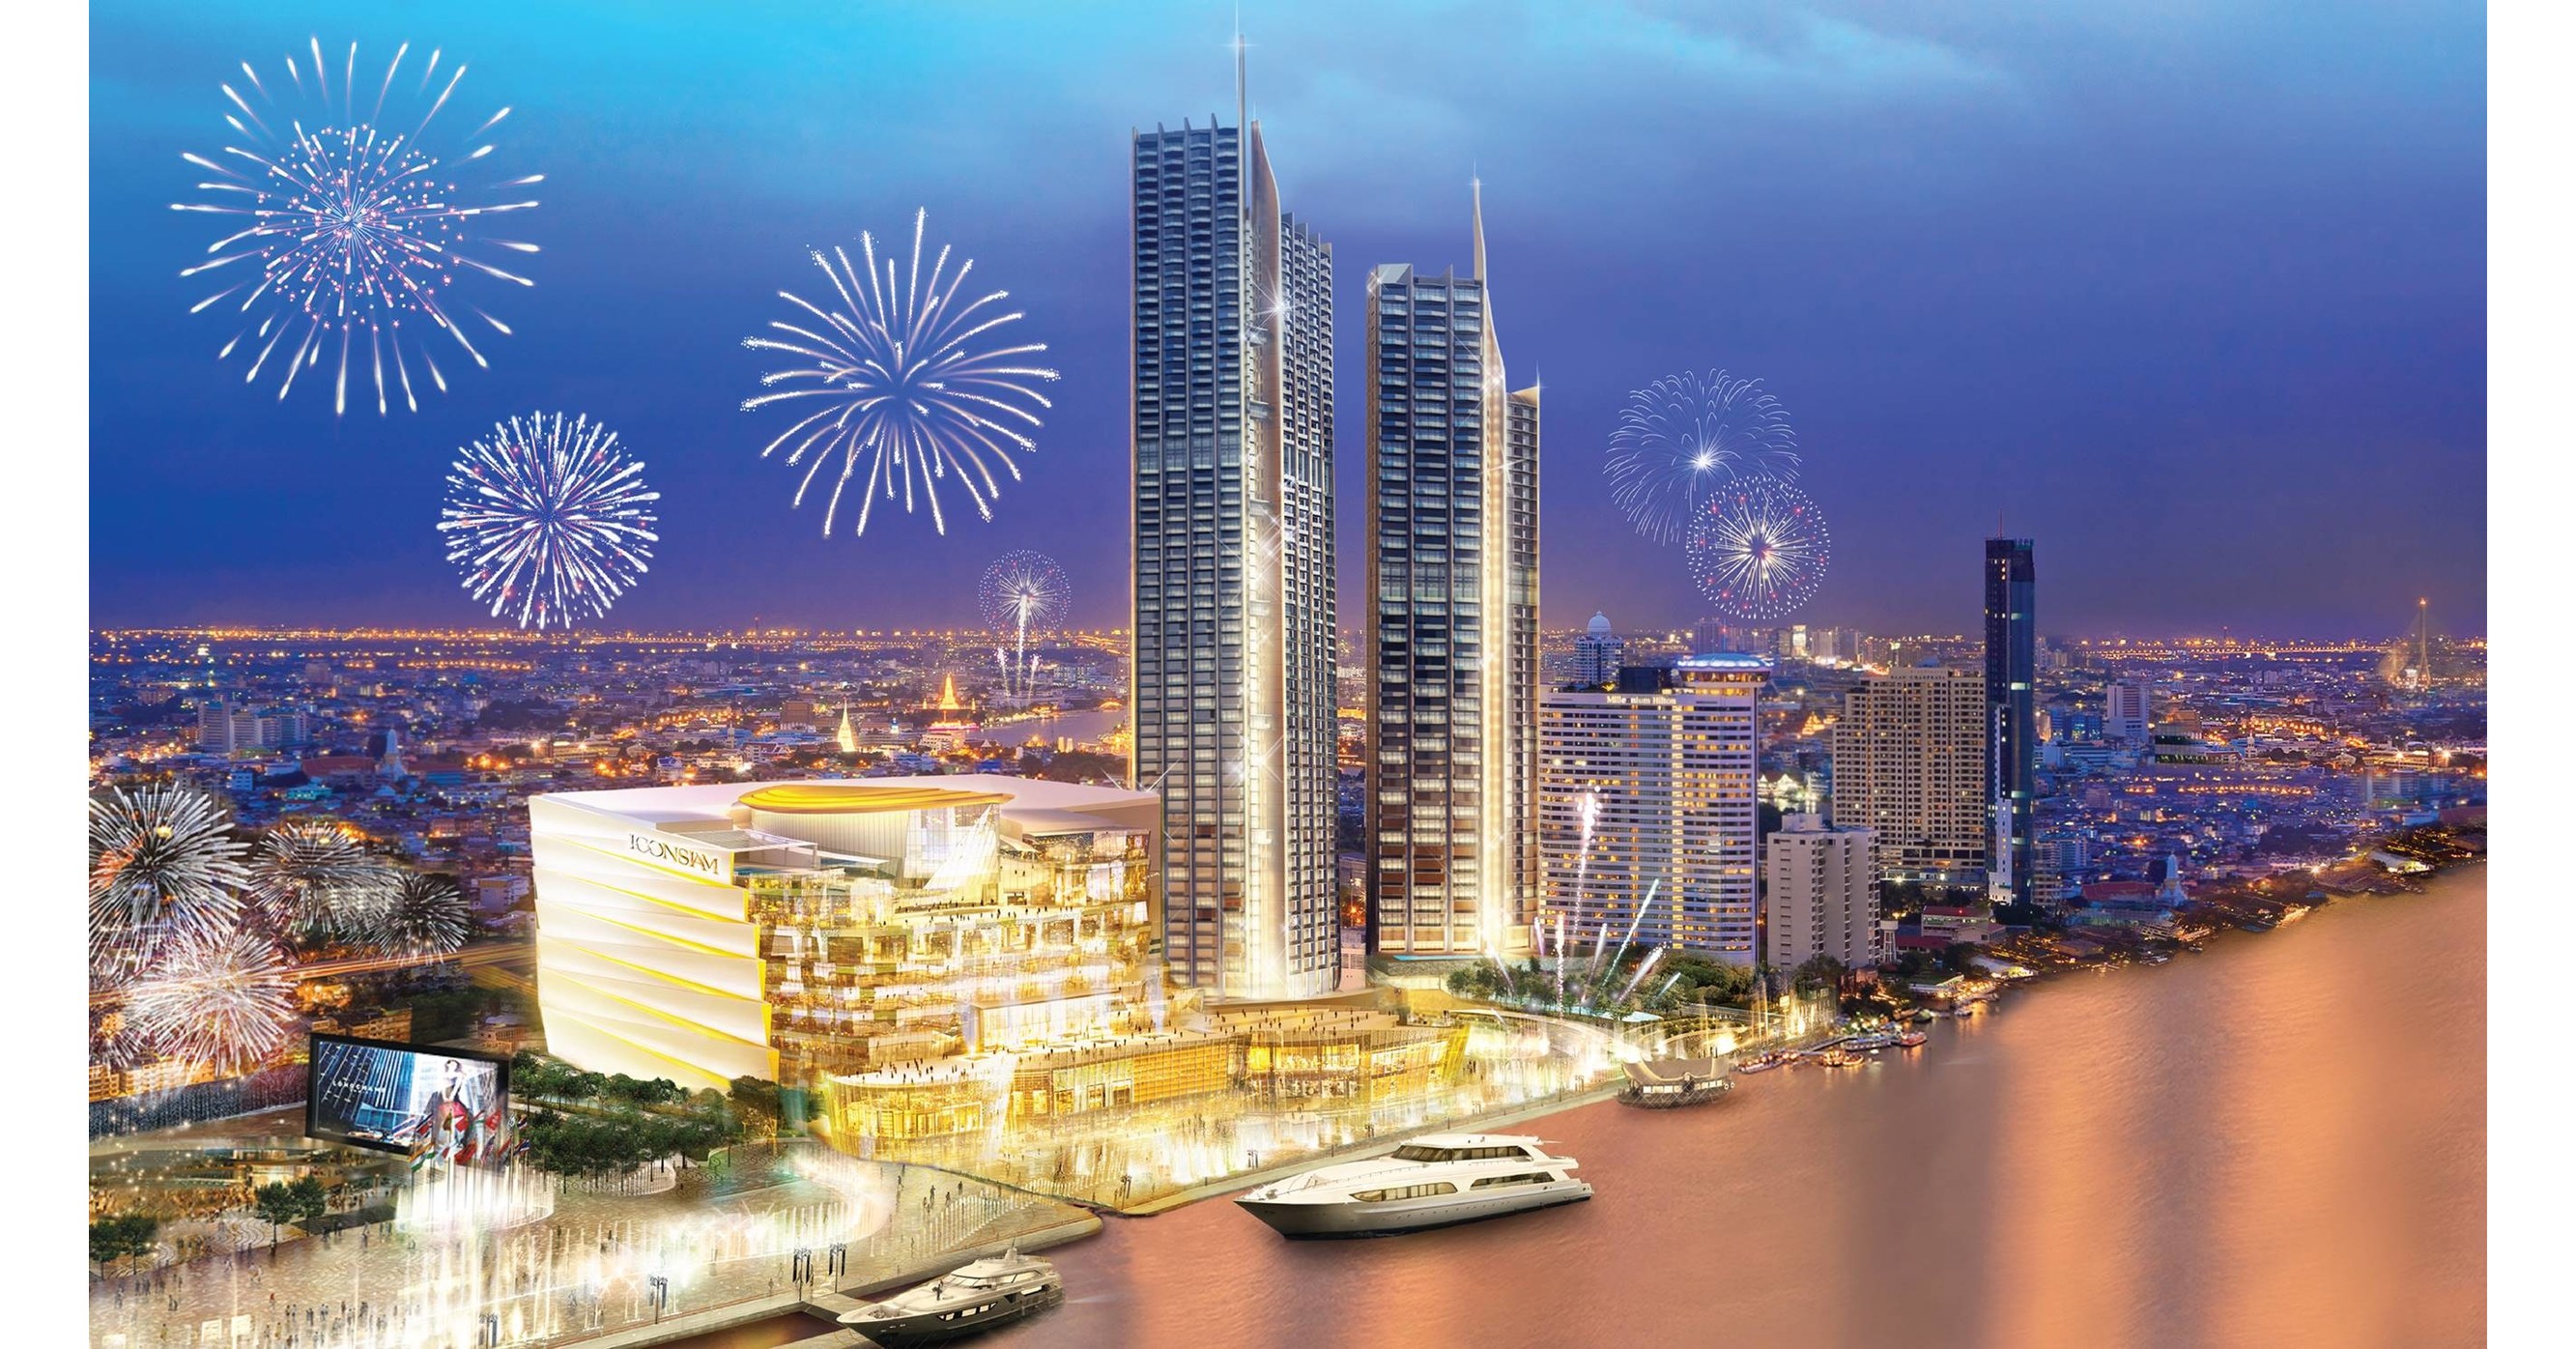 At last: Bangkok's IconSiam opens - Inside Retail Asia